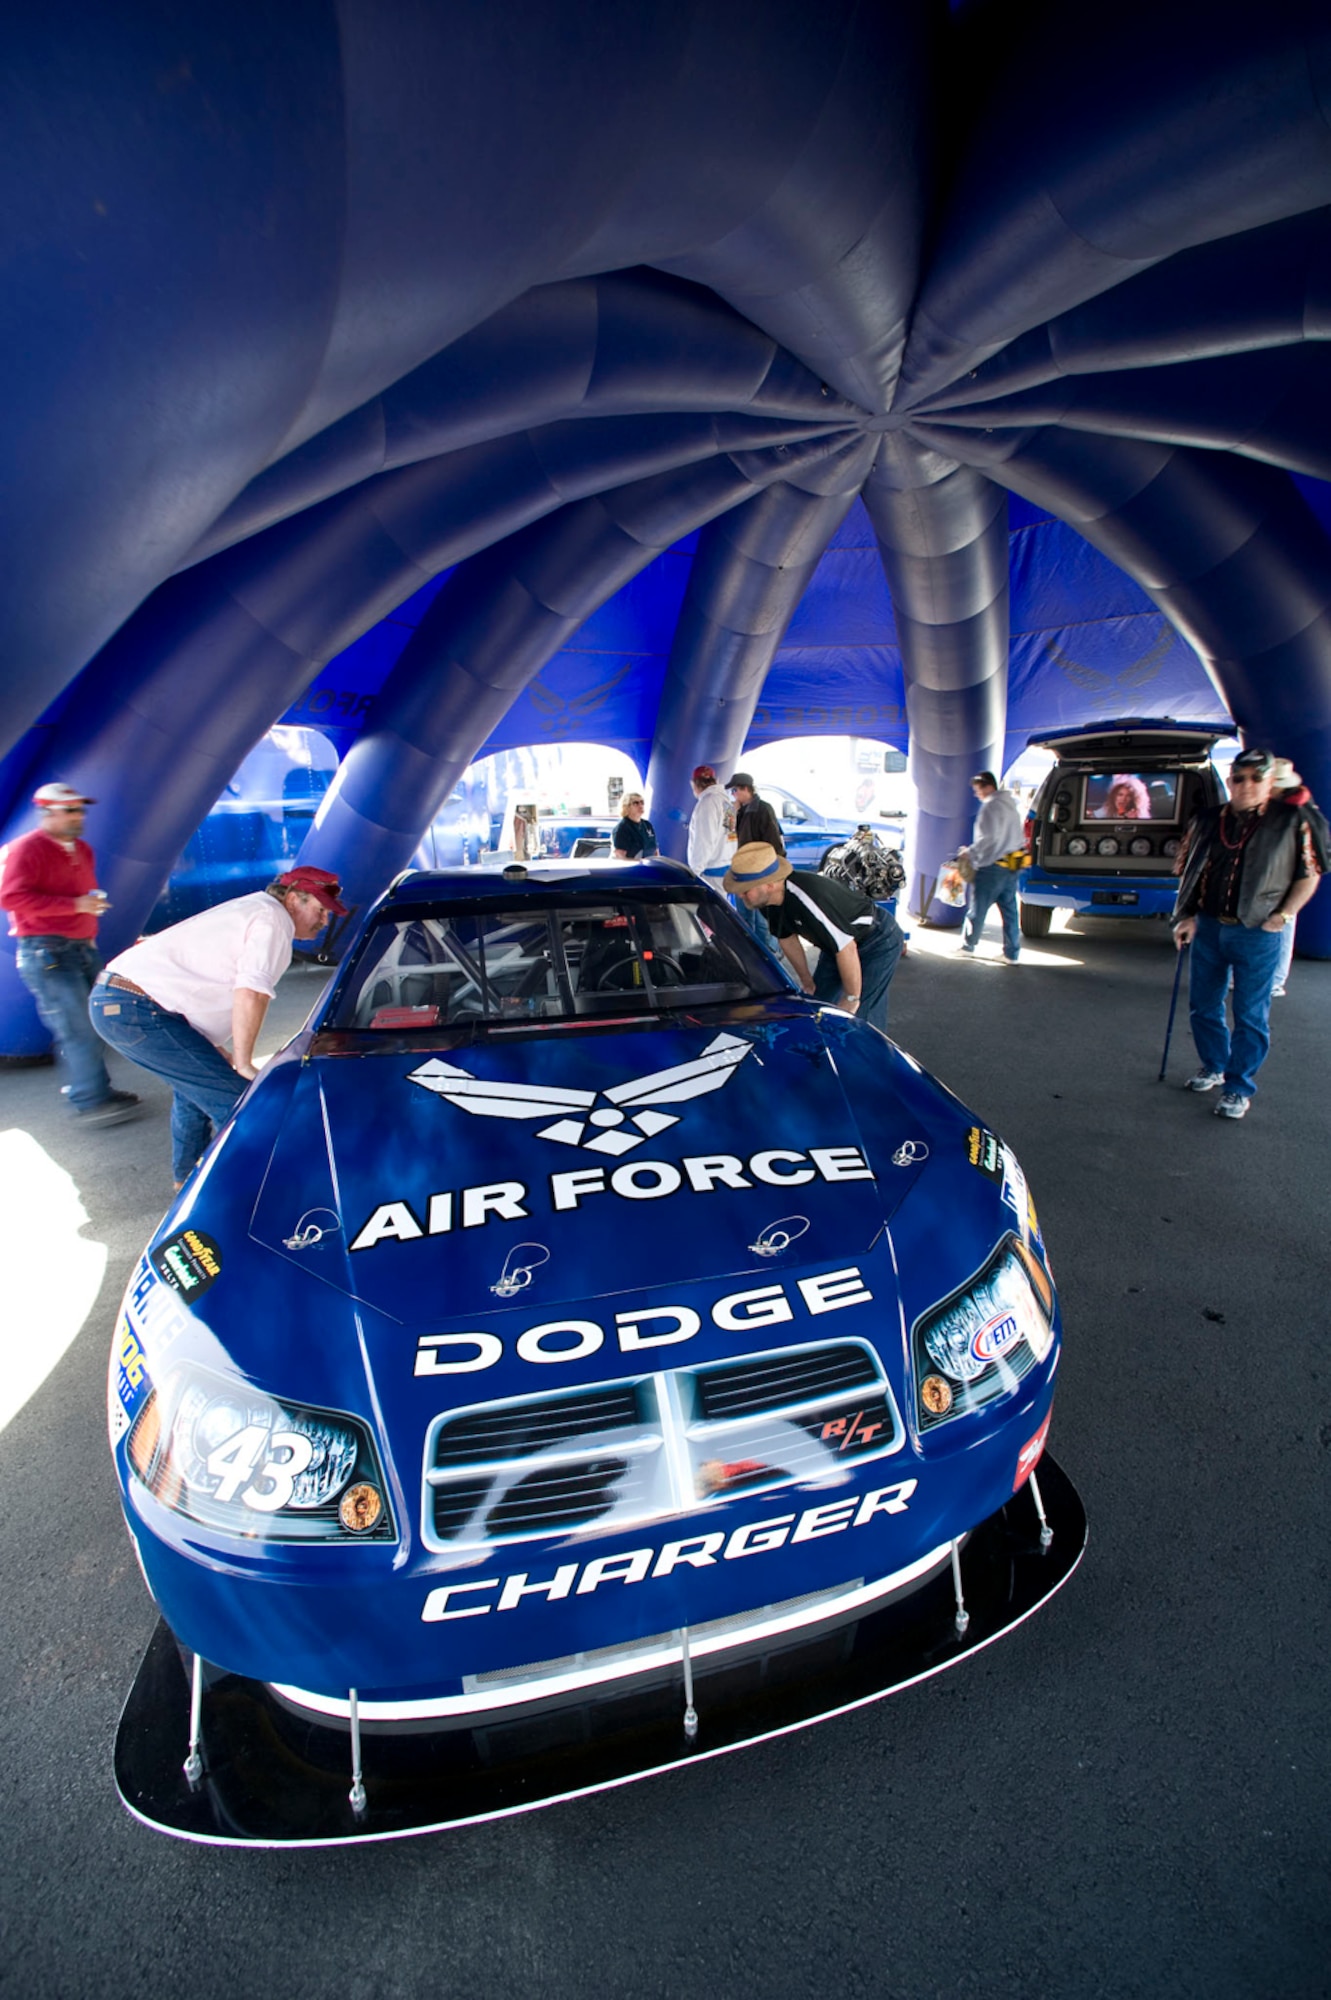 Race fans view the new Air Force sponsored No. 43 Dodge Feb. 28 at the Las Vegas Motor Speedway in Nevada. The Air Force paint scheme will be on the track in 2009 at Dover International Speedway, Del., Talledega Superspeedway, Ala., Daytona International Speedway, Fla., and Lowes Motor Speedway in Charlotte, N.C.  (U.S. Air Force photo/Master Sgt. Jack Braden)